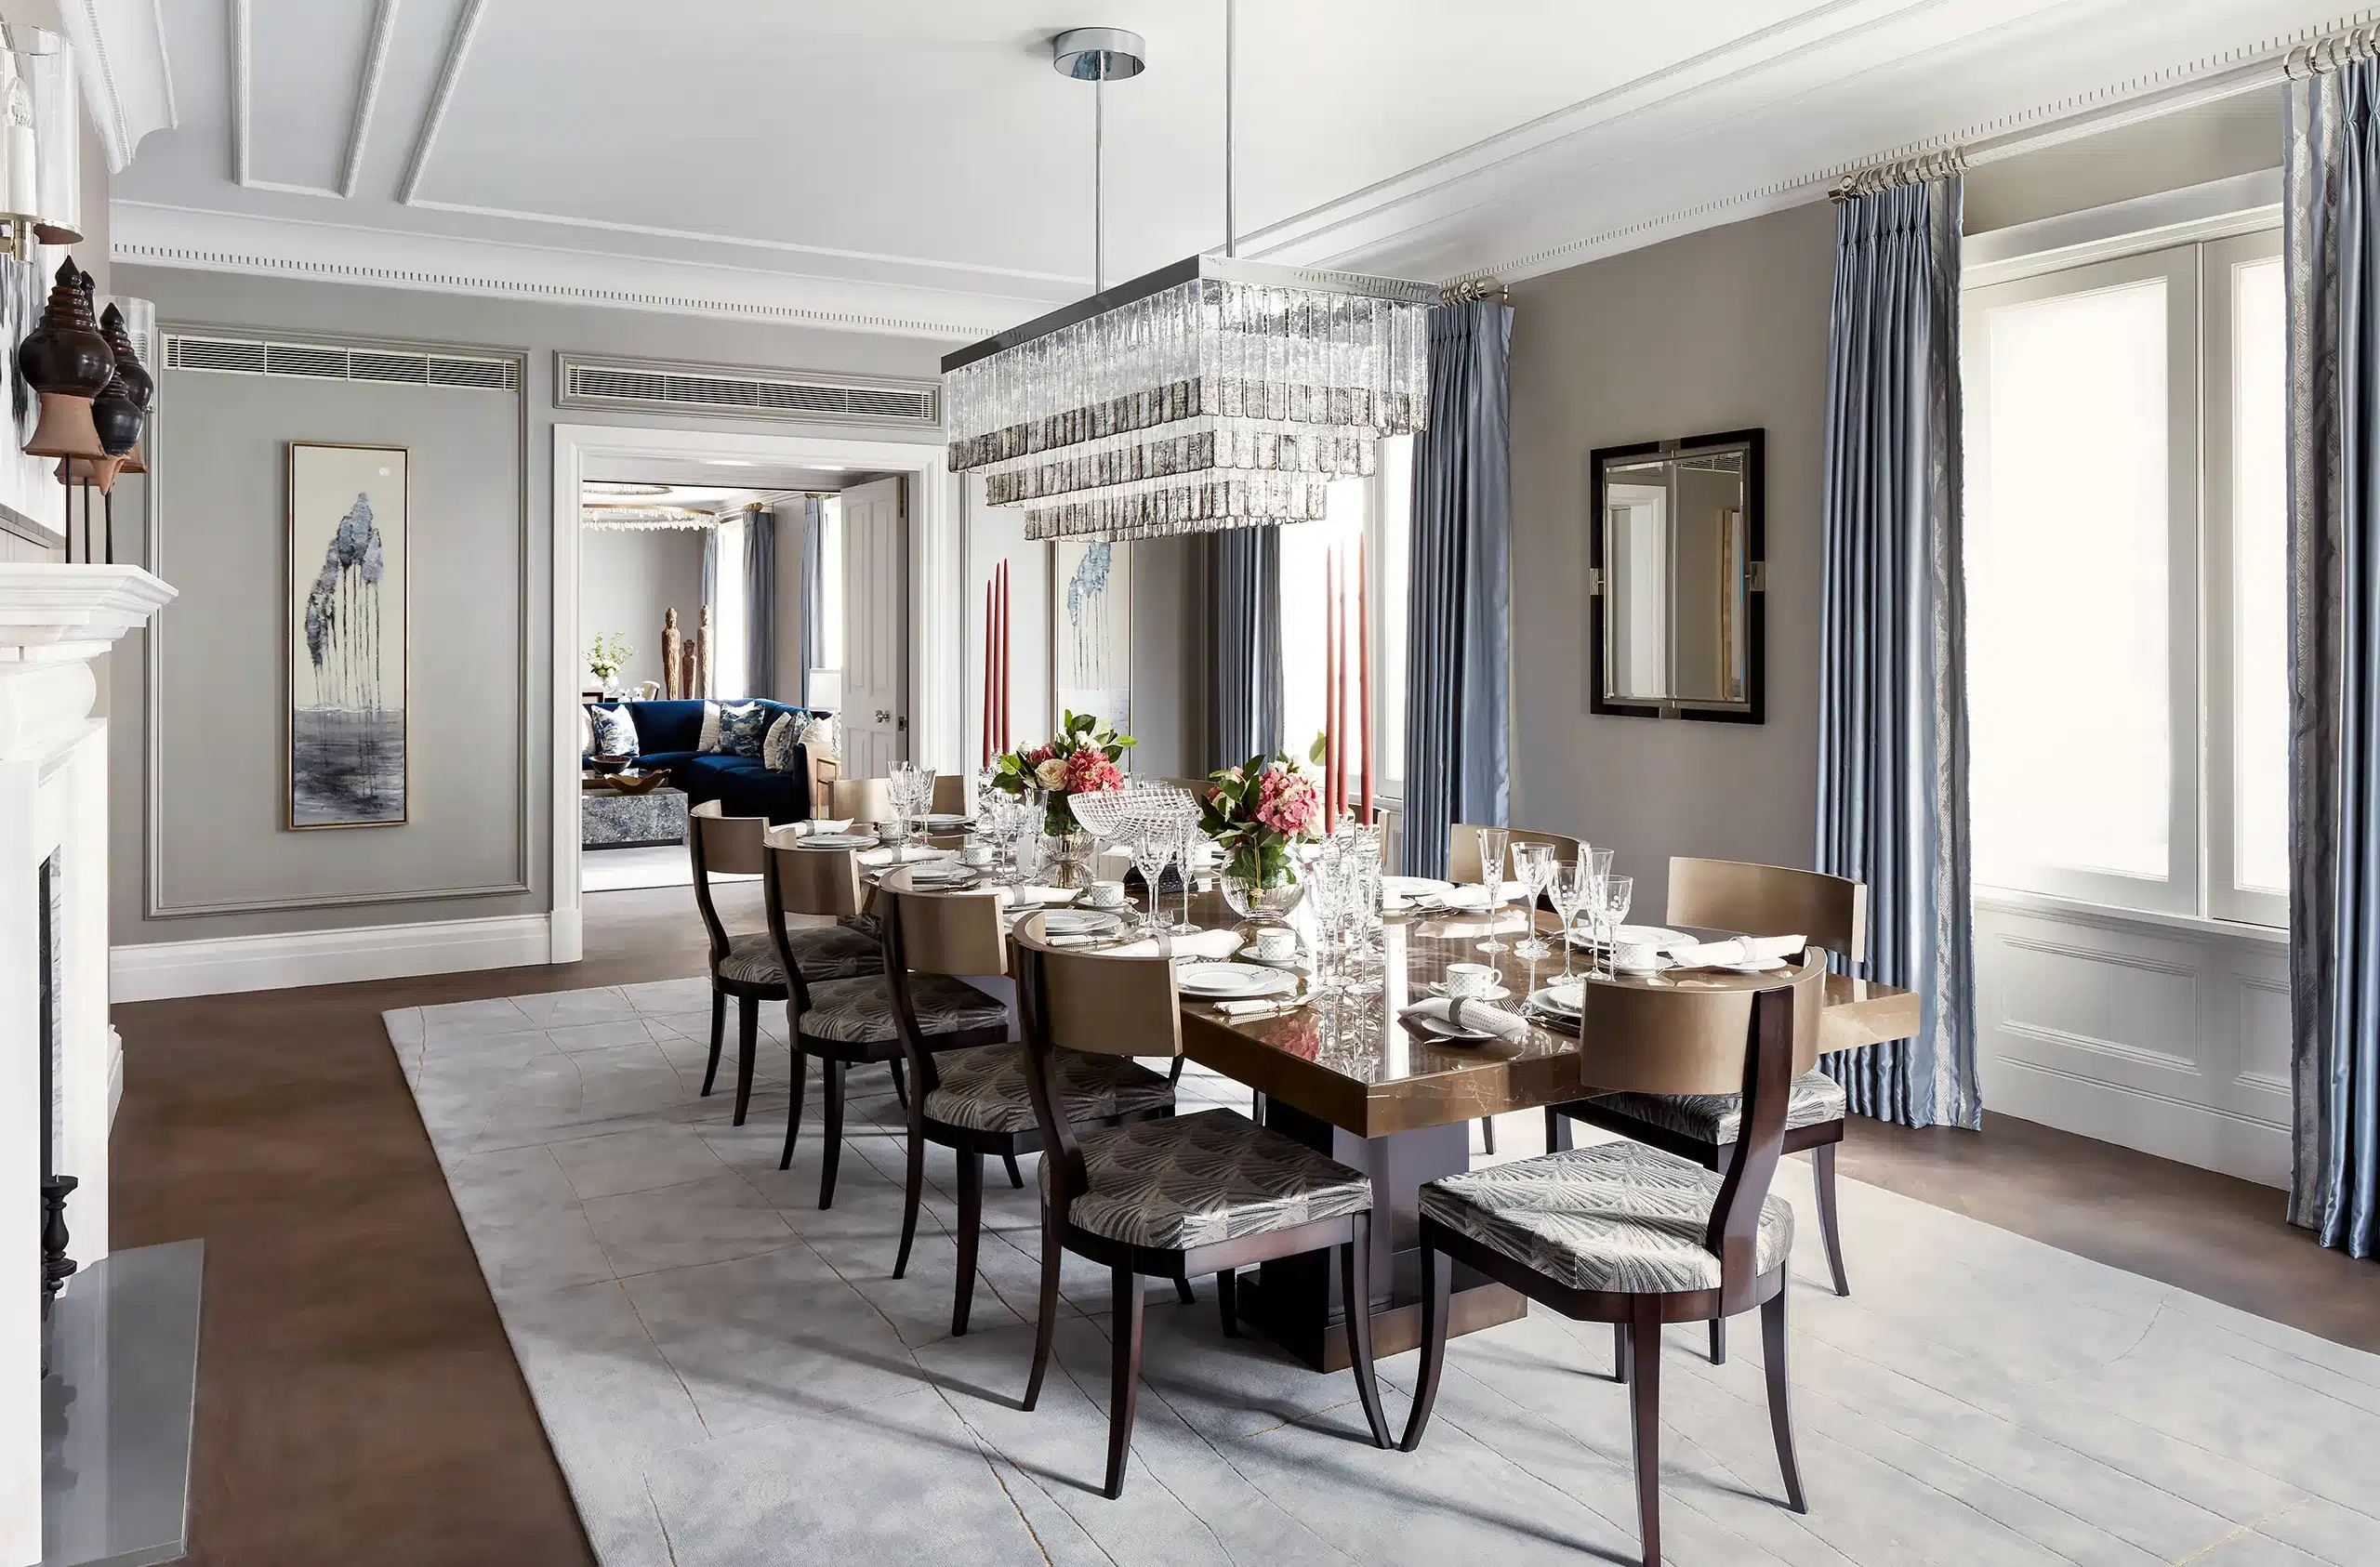 A contemporary dining room at a residential home in St James, as designed by Katharine Pooley, the UK's best interior designer